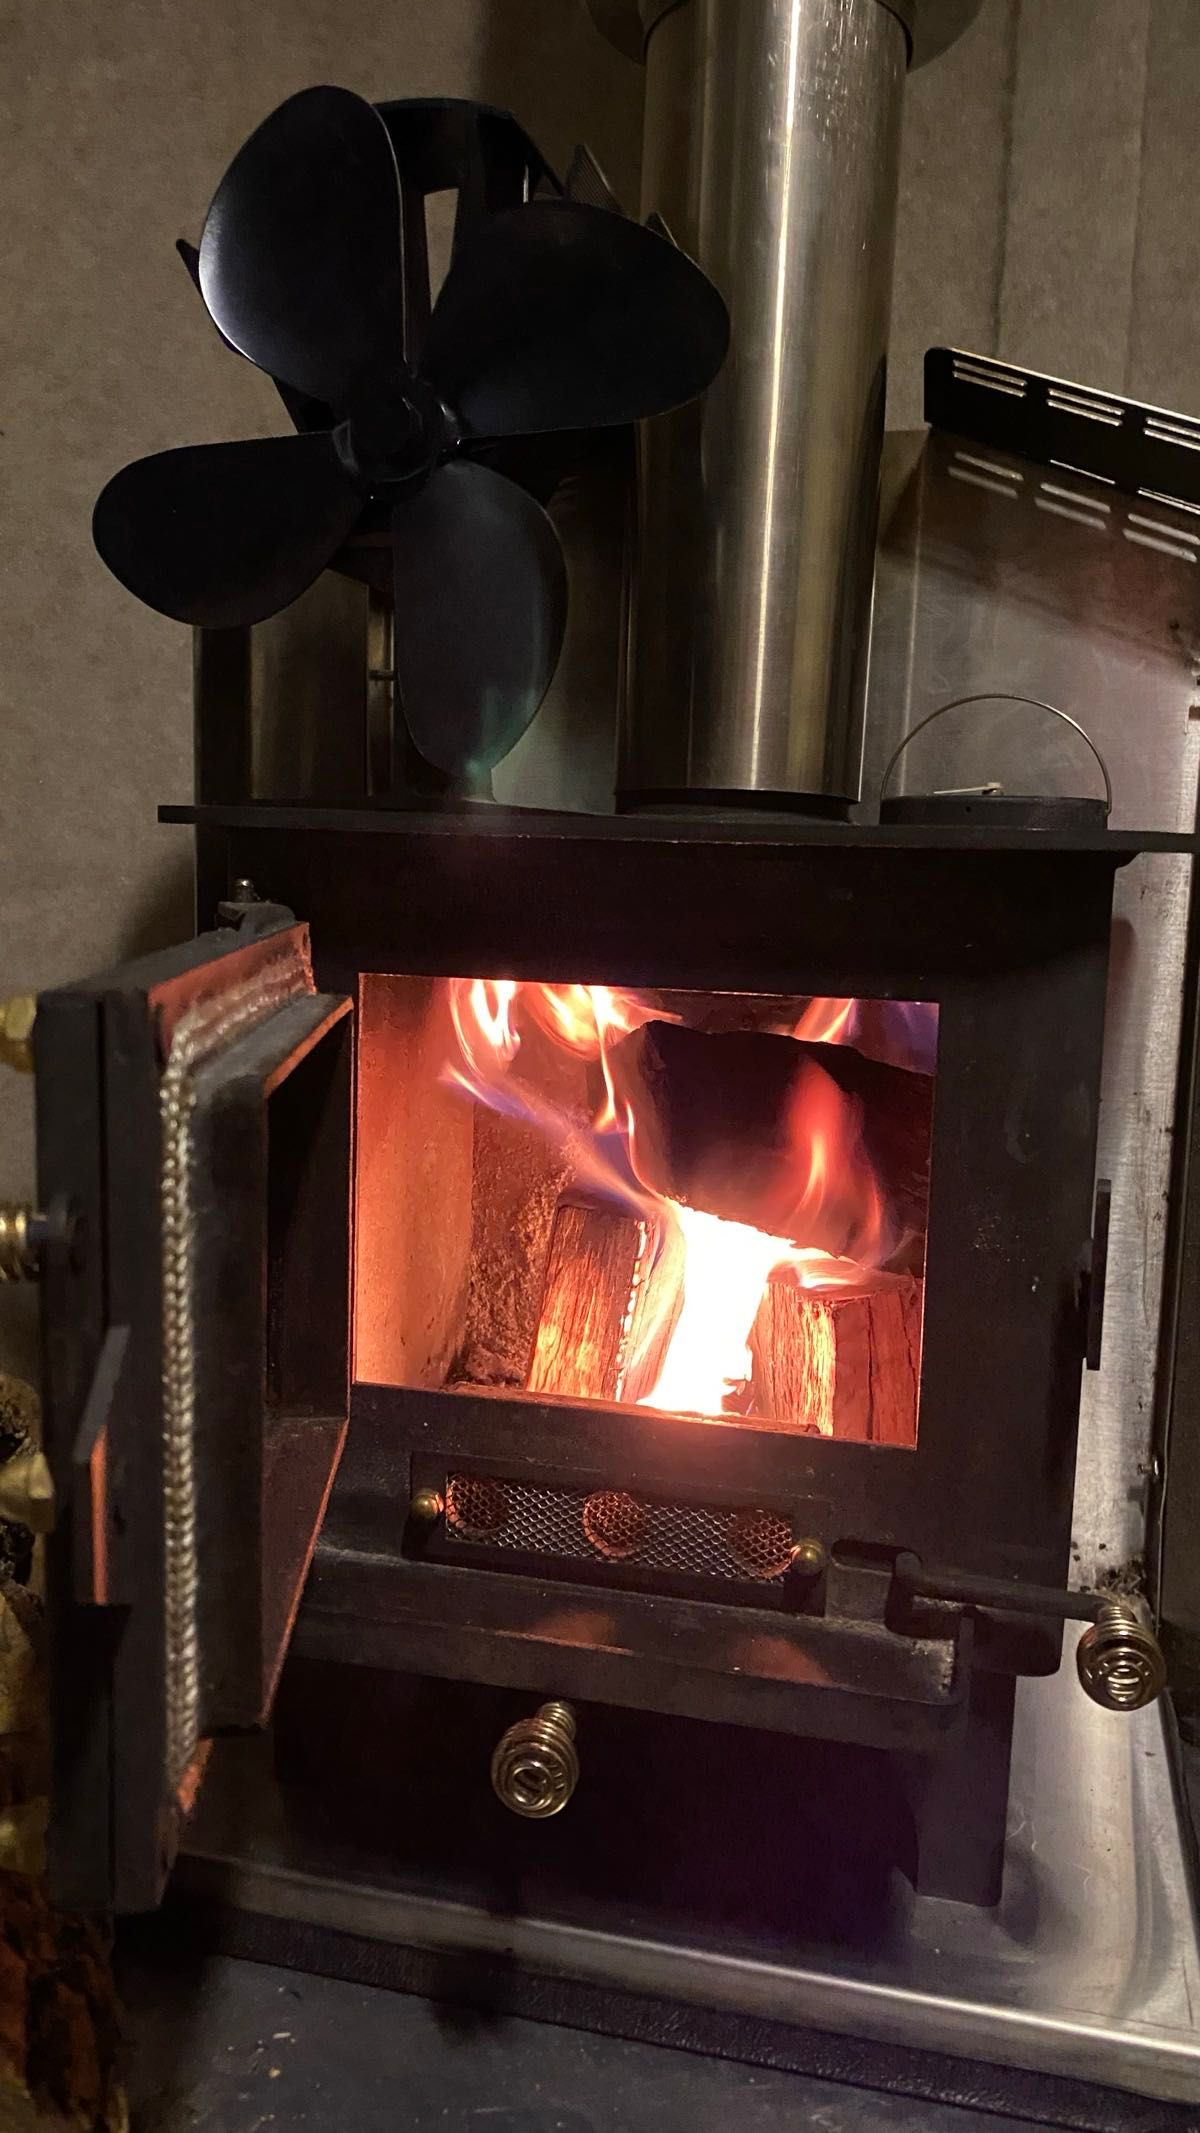 Very grateful for a wood burning stove in camper on a cold, wet and windy night.